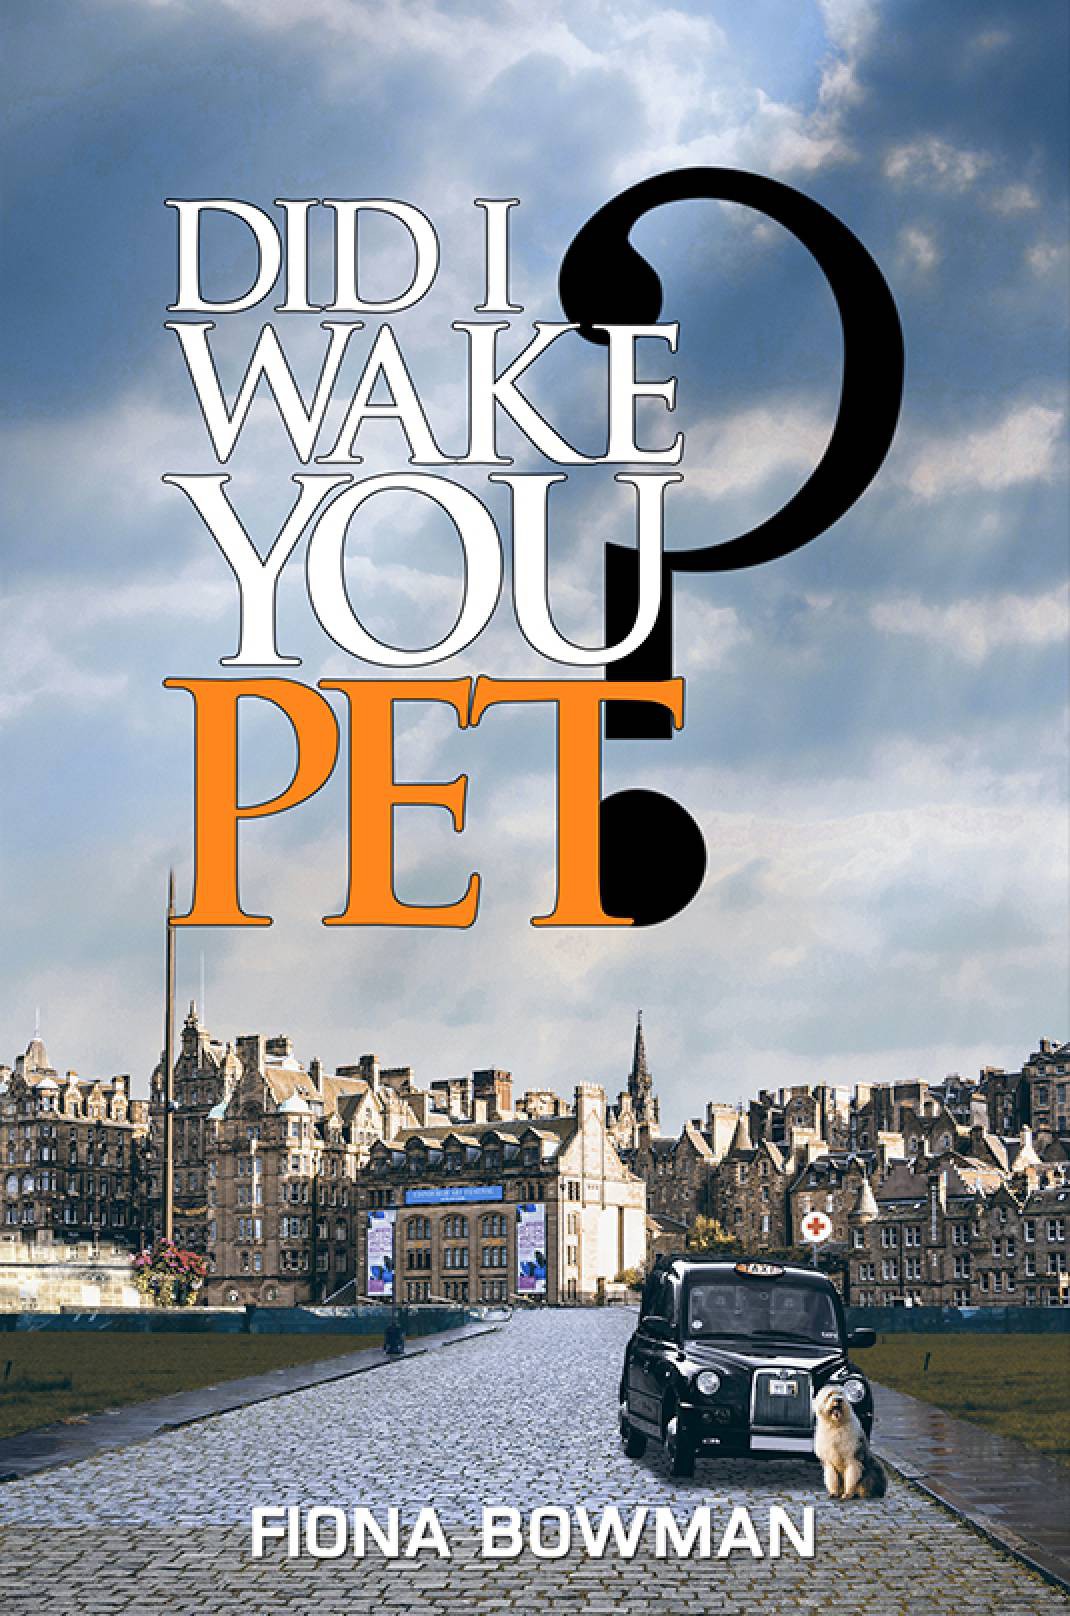 Essex TV features Fiona Bowman’s ‘Did I Wake You, Pet?’